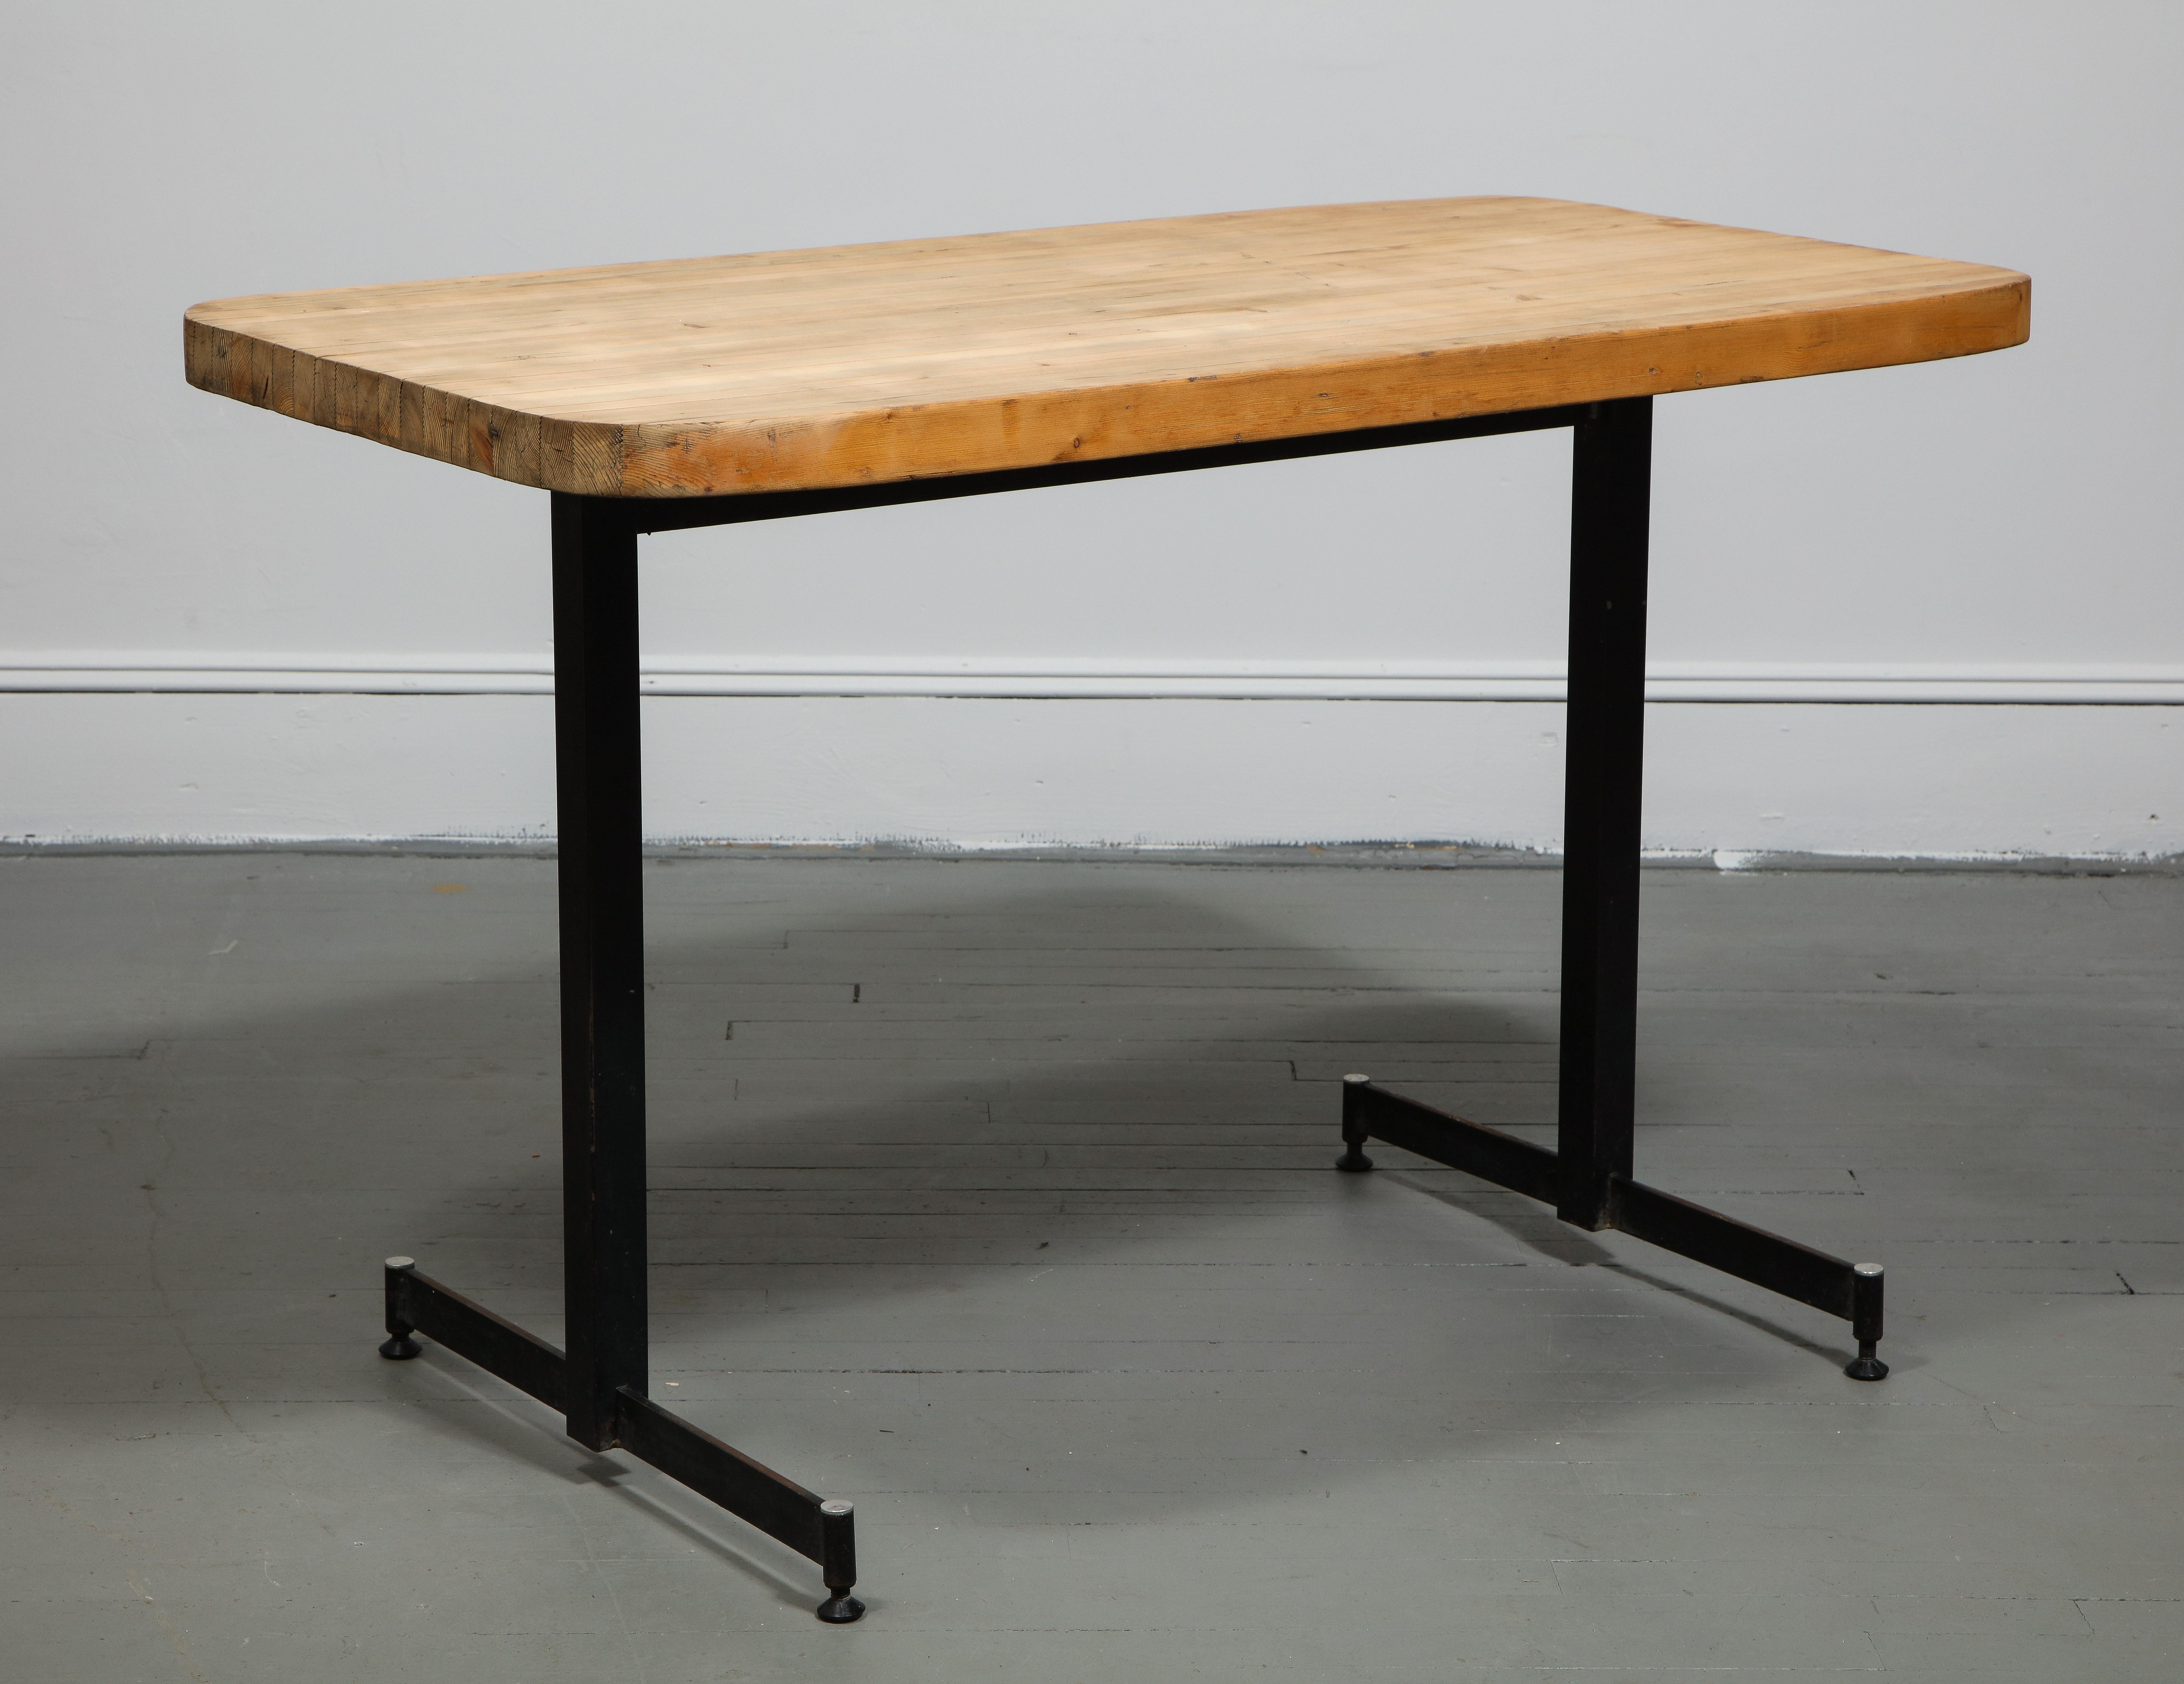 Pine Work Table Attributed to Charlotte Perriand, France, c. 1960s

Humble in design, this table consists of a solid pine top and clean metal base. 